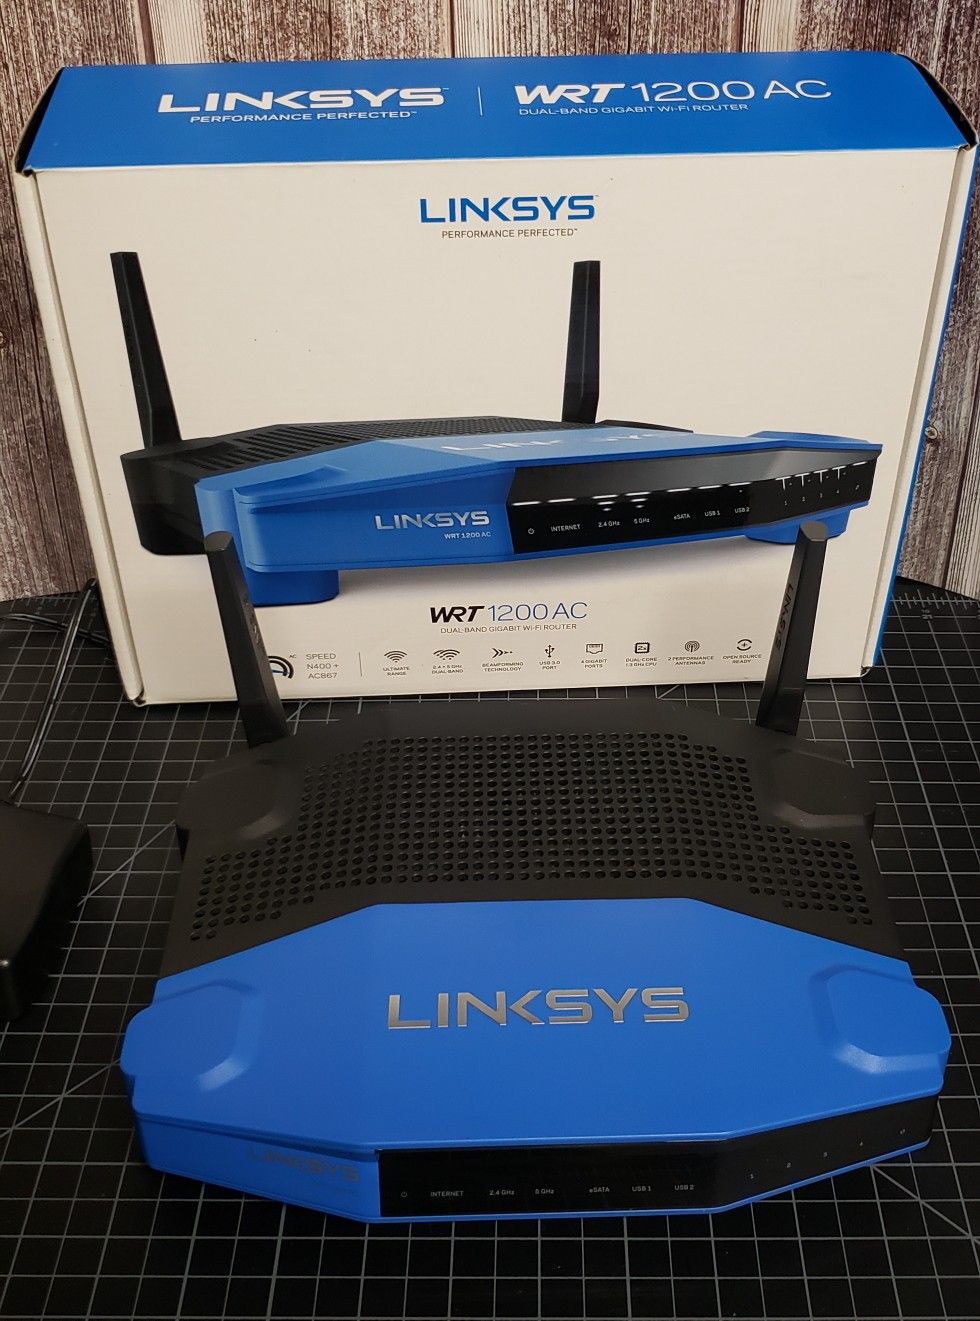 Linksys WRT1200AC Dual Band Gigabyte Wi-Fi Router